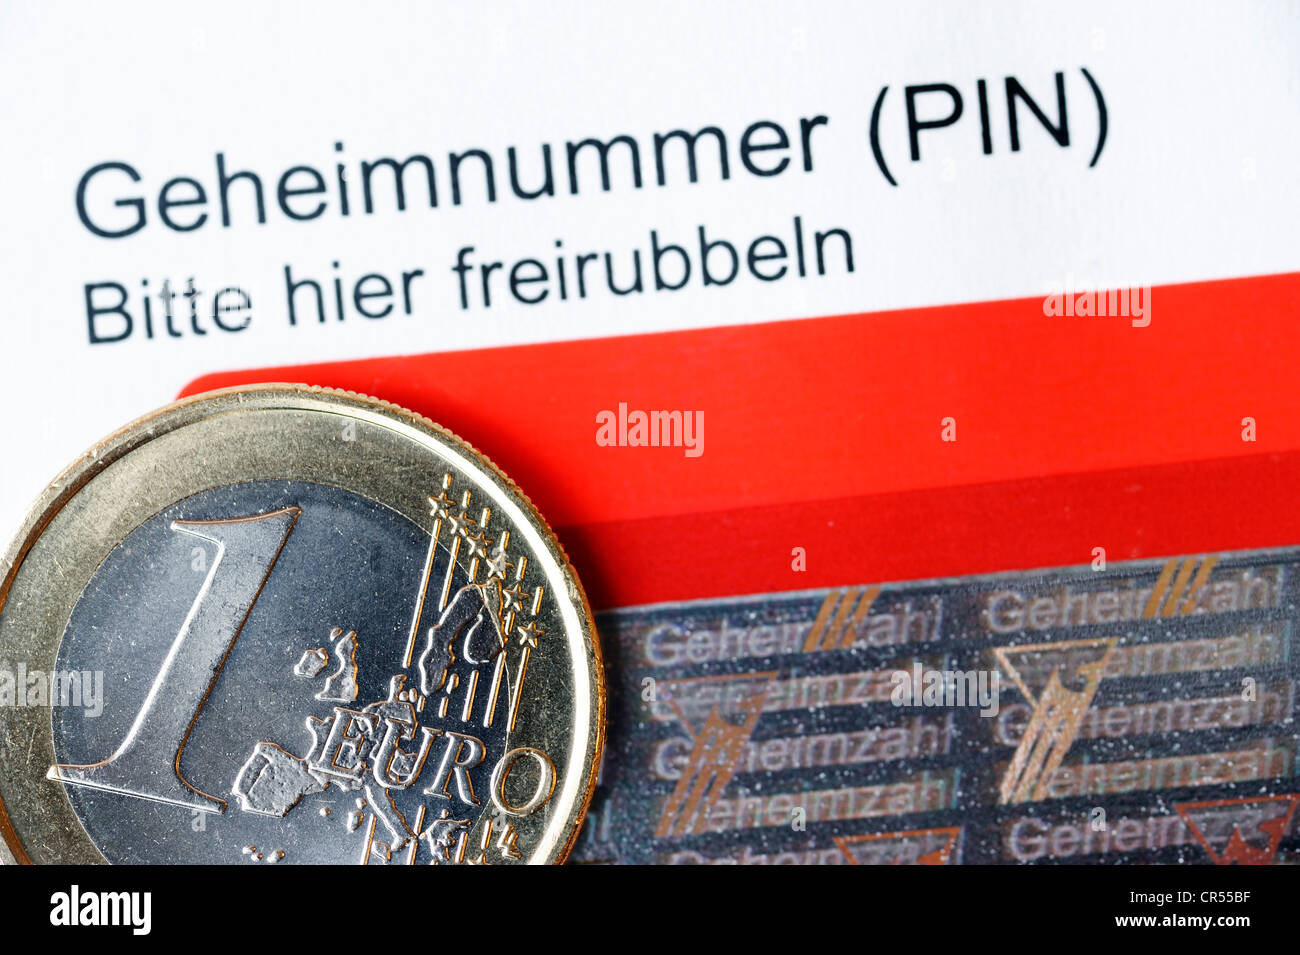 PIN, personal identification number and number field for the new German identity card Stock Photo